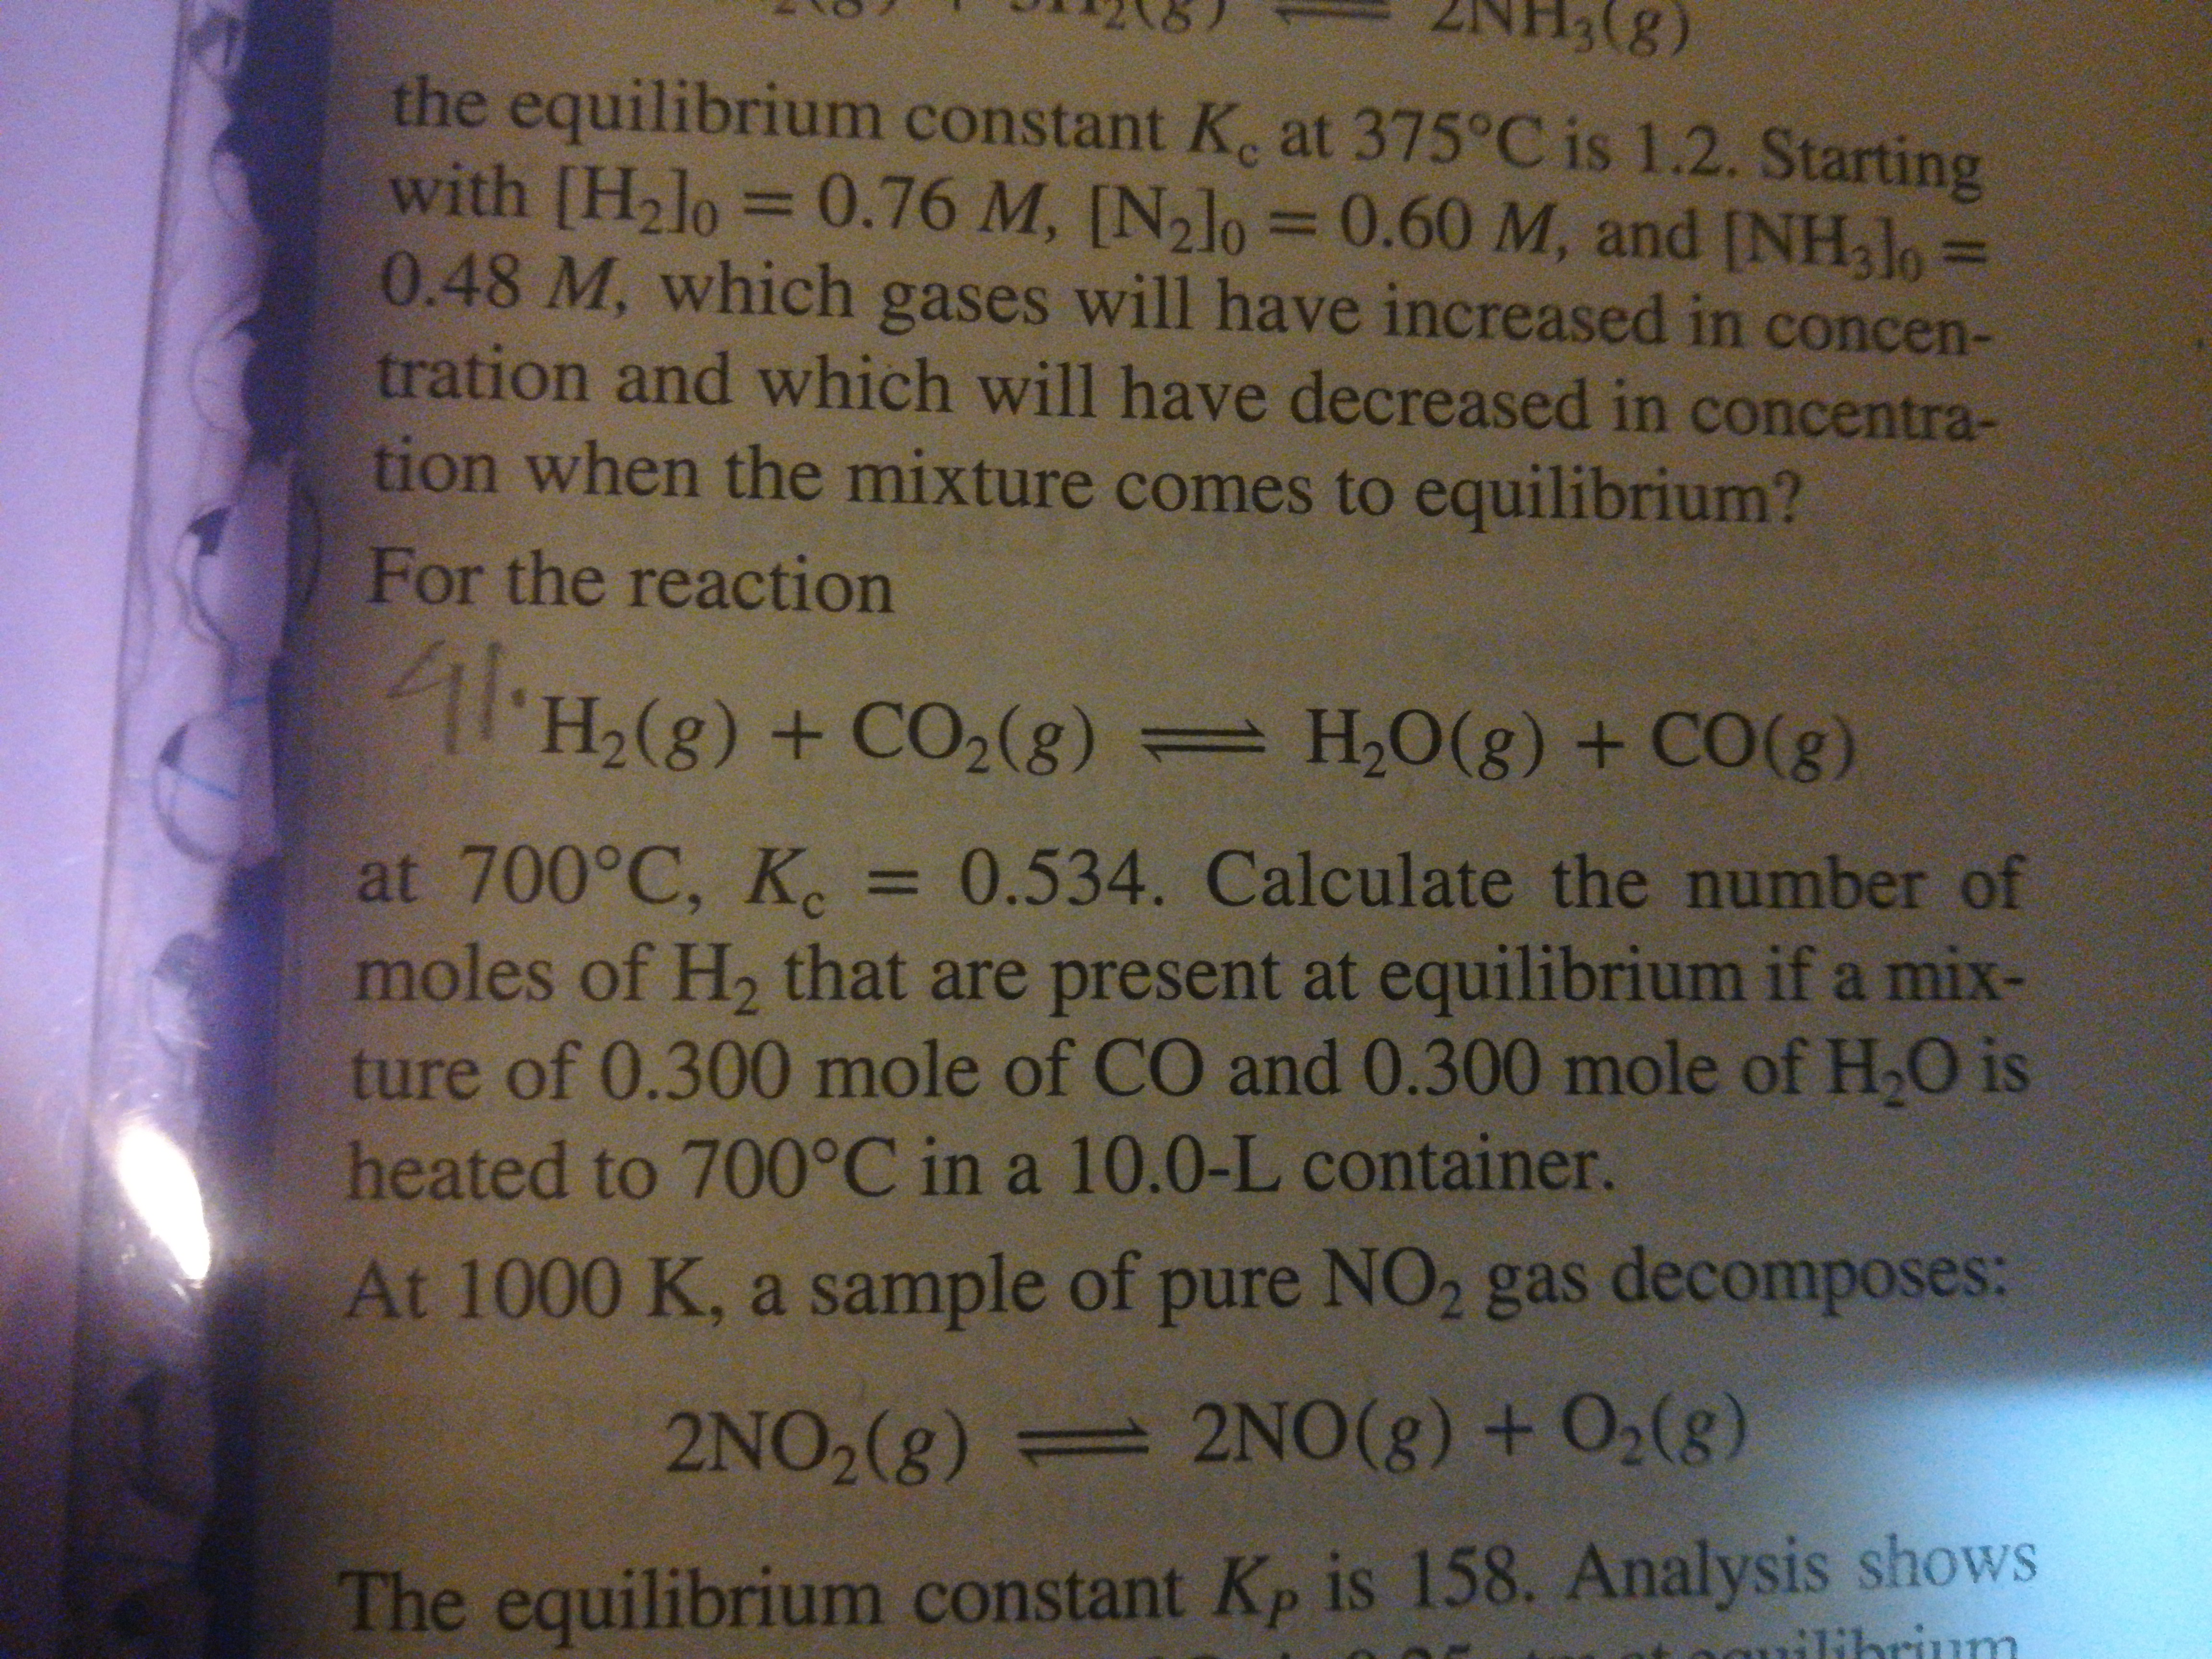 (8):
the equilibrium constant K. at 375°C is 1.2. Starting
with [H2lo
0.48 M, which gases will have increased in concen-
tration and which will have decreased in concentra-
tion when the mixture comes to equilibrium?
0.76 M, [N,lo D0.60 M, and [NH3J0
%3D
%3D
%3D
For the reaction
'H,(g) + CO,(g) = H,O(g) + CO(g)
at 700°C, K, =
moles of H, that are present at equilibrium if a mix-
ture of 0.300 mole of CO and 0.300 mole of H,O is
3D0.534. Calculate the number of
heated to 700°C in a 10.0-L container.
At 1000 K, a sample of pure NO2 gas decomposes:
2NO2(g) 2NO(g) + O2(g)
The equilibrium constant Kp is 158. Analysis shows
ilibrium
